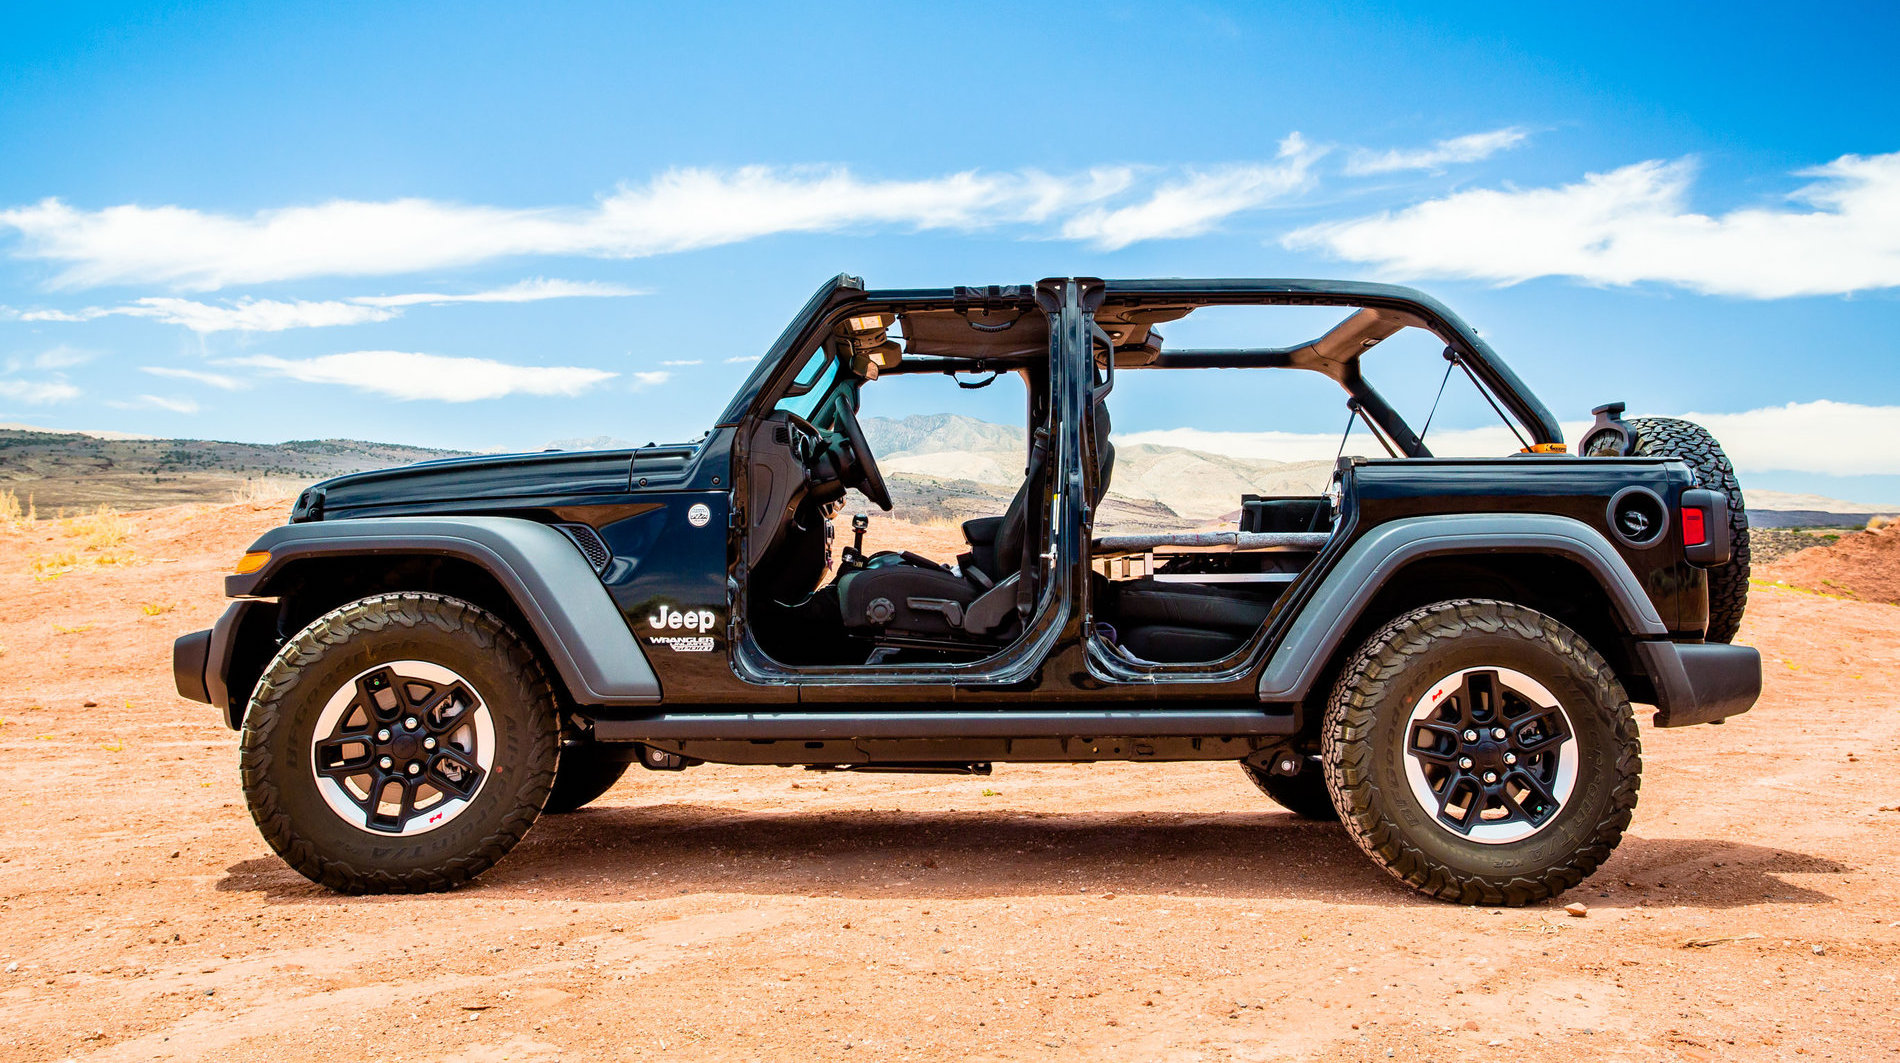 Naked Pics Were Talking Topless And Doorless Jl Wranglers Jeep Wrangler Jl News